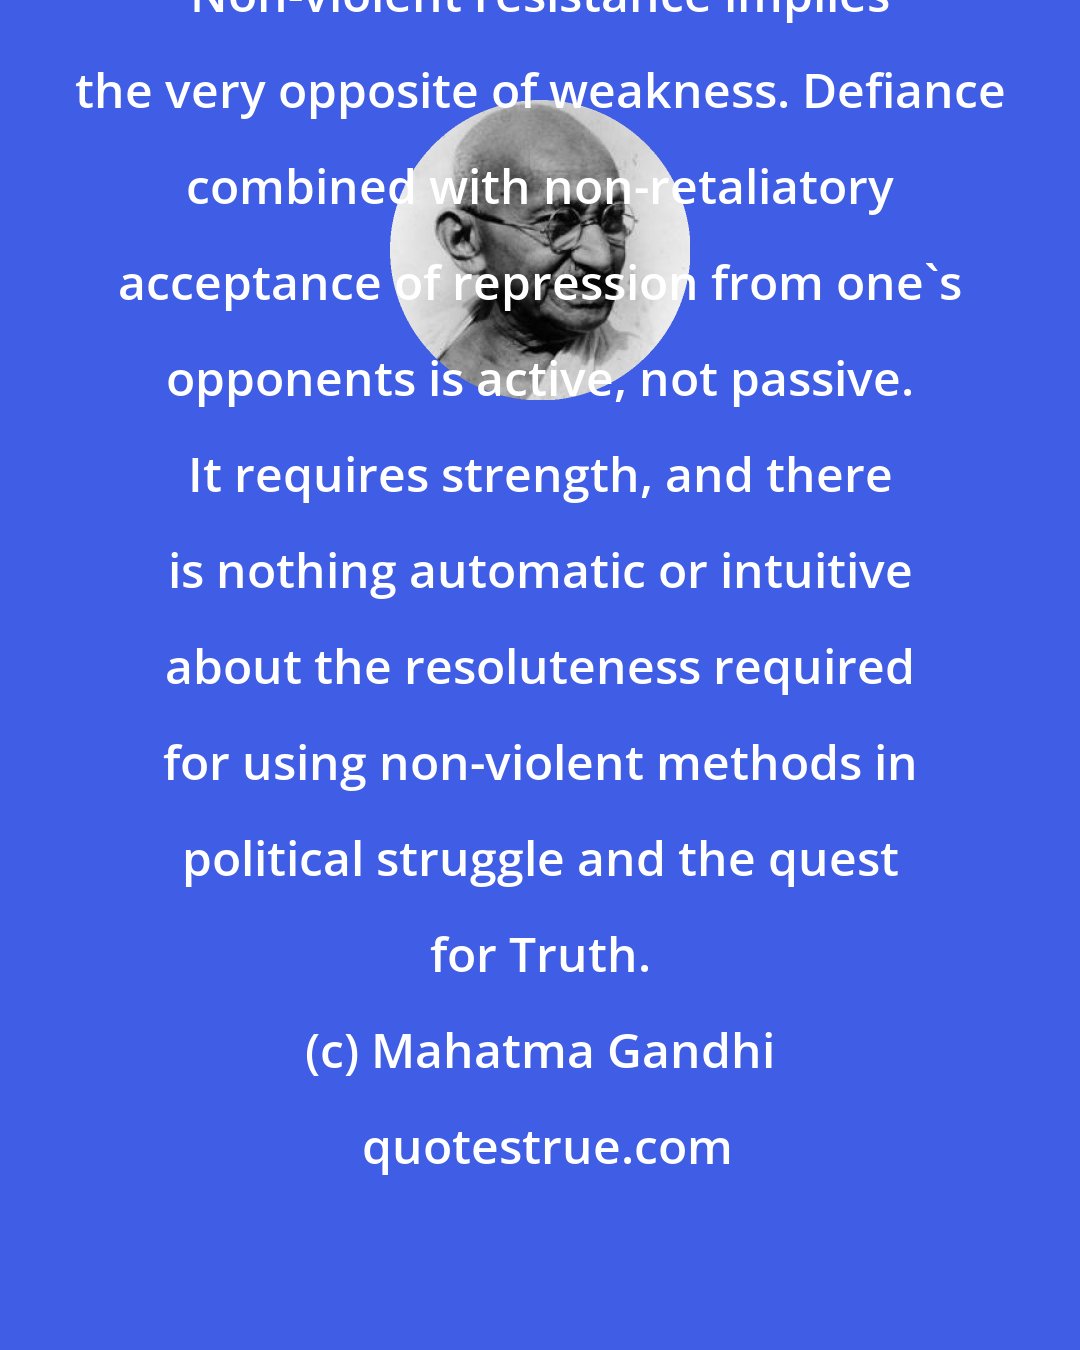 Mahatma Gandhi: Non-violent resistance implies the very opposite of weakness. Defiance combined with non-retaliatory acceptance of repression from one's opponents is active, not passive. It requires strength, and there is nothing automatic or intuitive about the resoluteness required for using non-violent methods in political struggle and the quest for Truth.